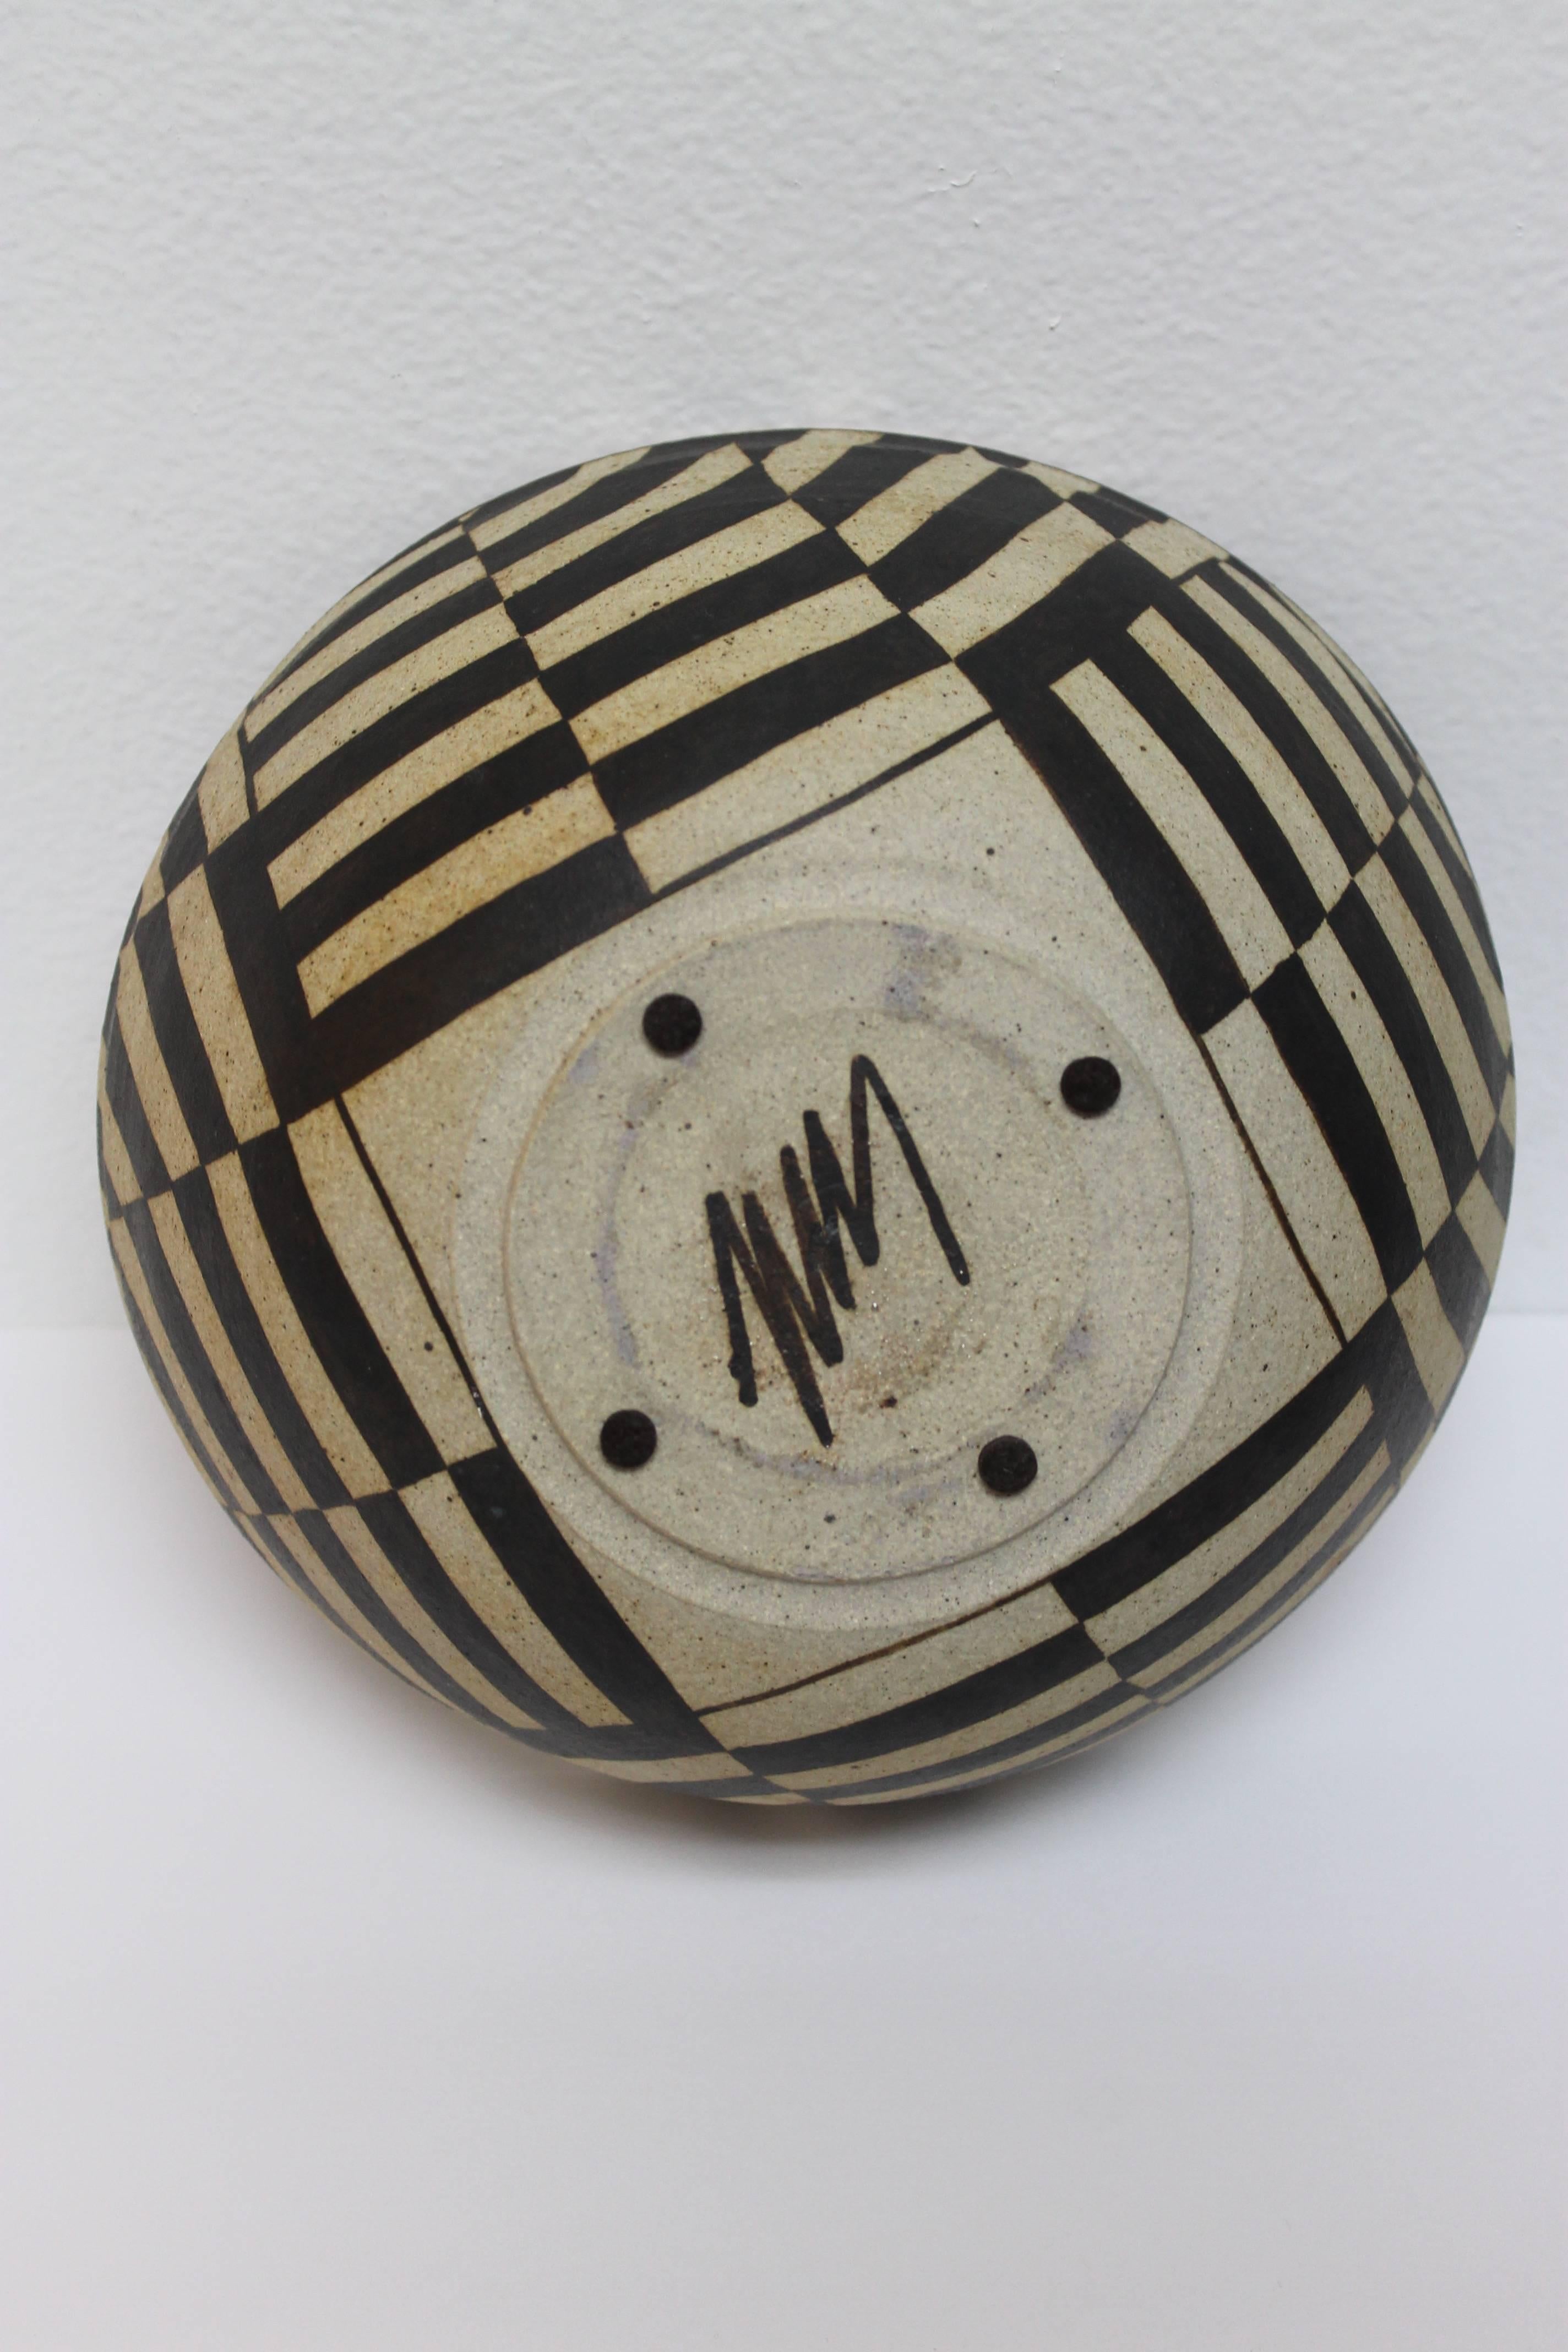 Kathleen Nez ceramic bowl.
She came to Santa Fe from LA to study printmaking at the Institute of American Indian Arts, where she earned a bachelor's degree in Fine arts and discovered a love for ceramics. She ultimately became well-known for her